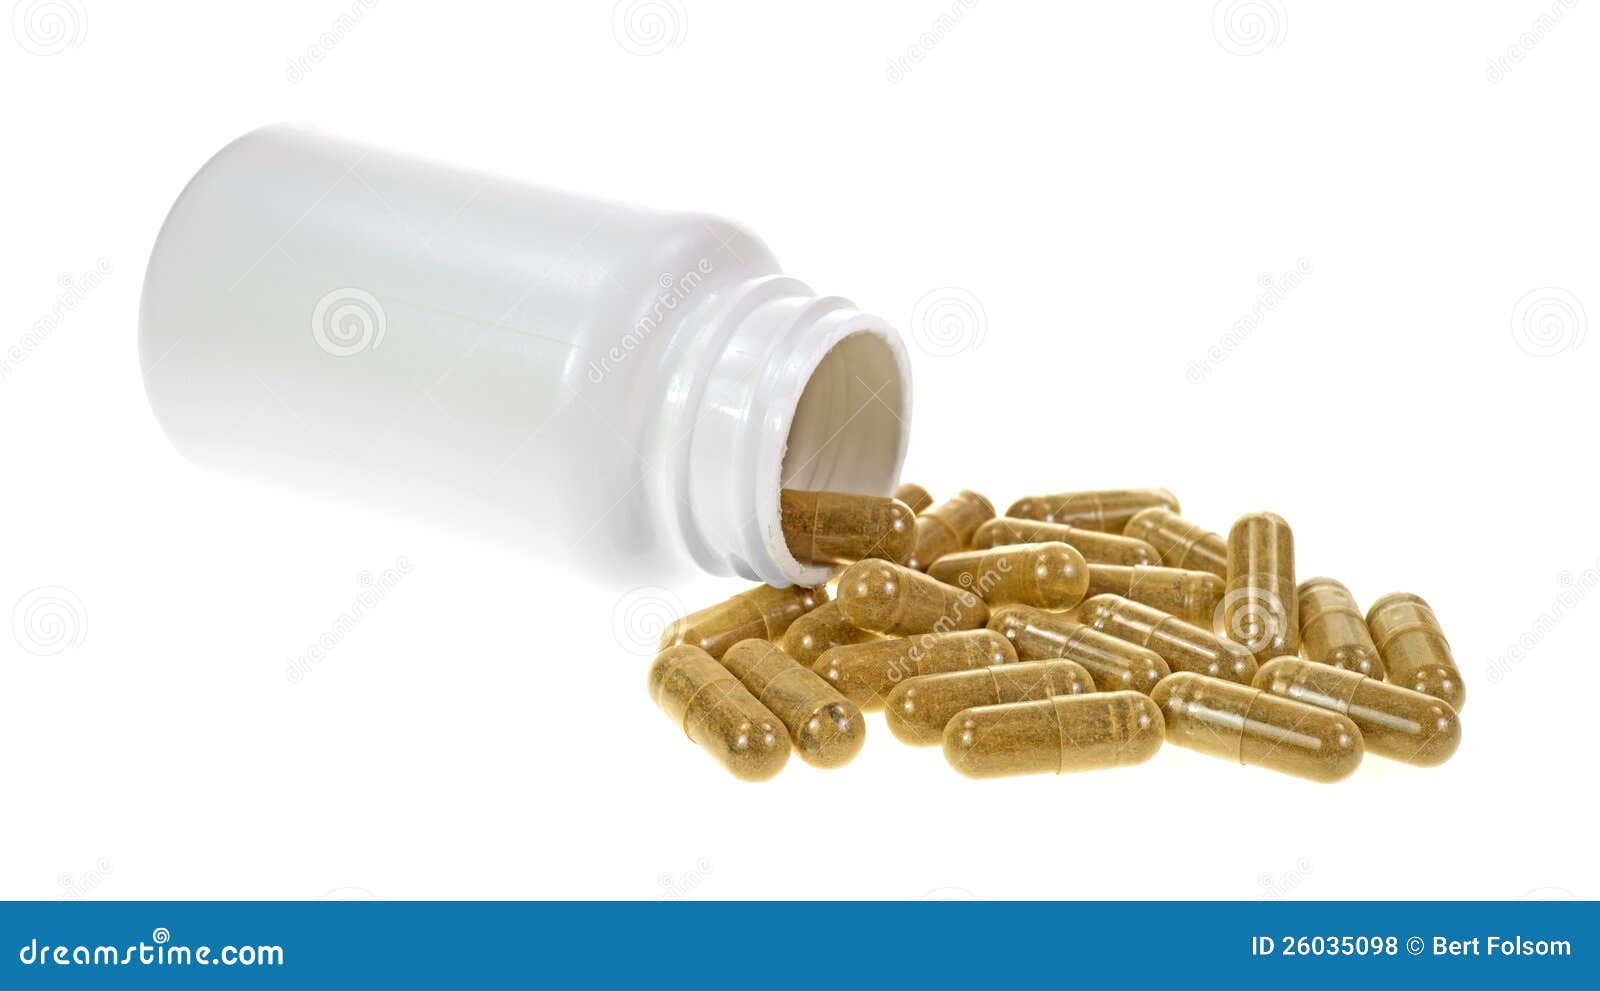 bottle of green tea extract capsules spilling